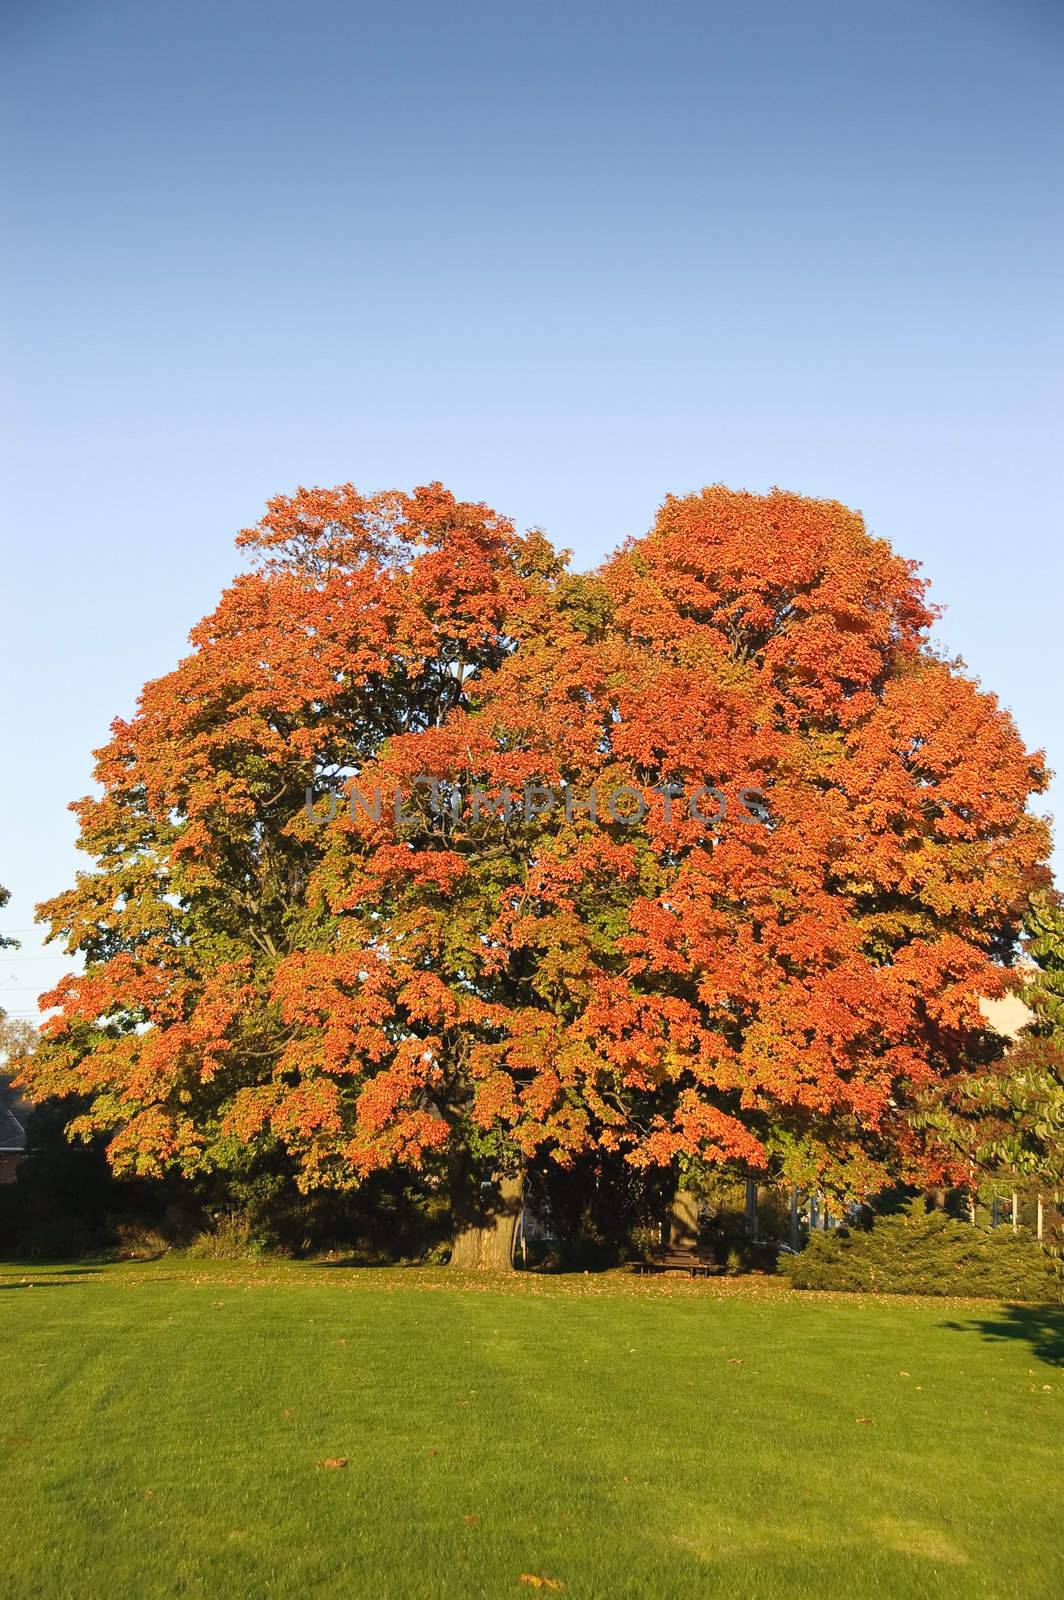 Large, mature maple tree with colorful foliage in a park setting